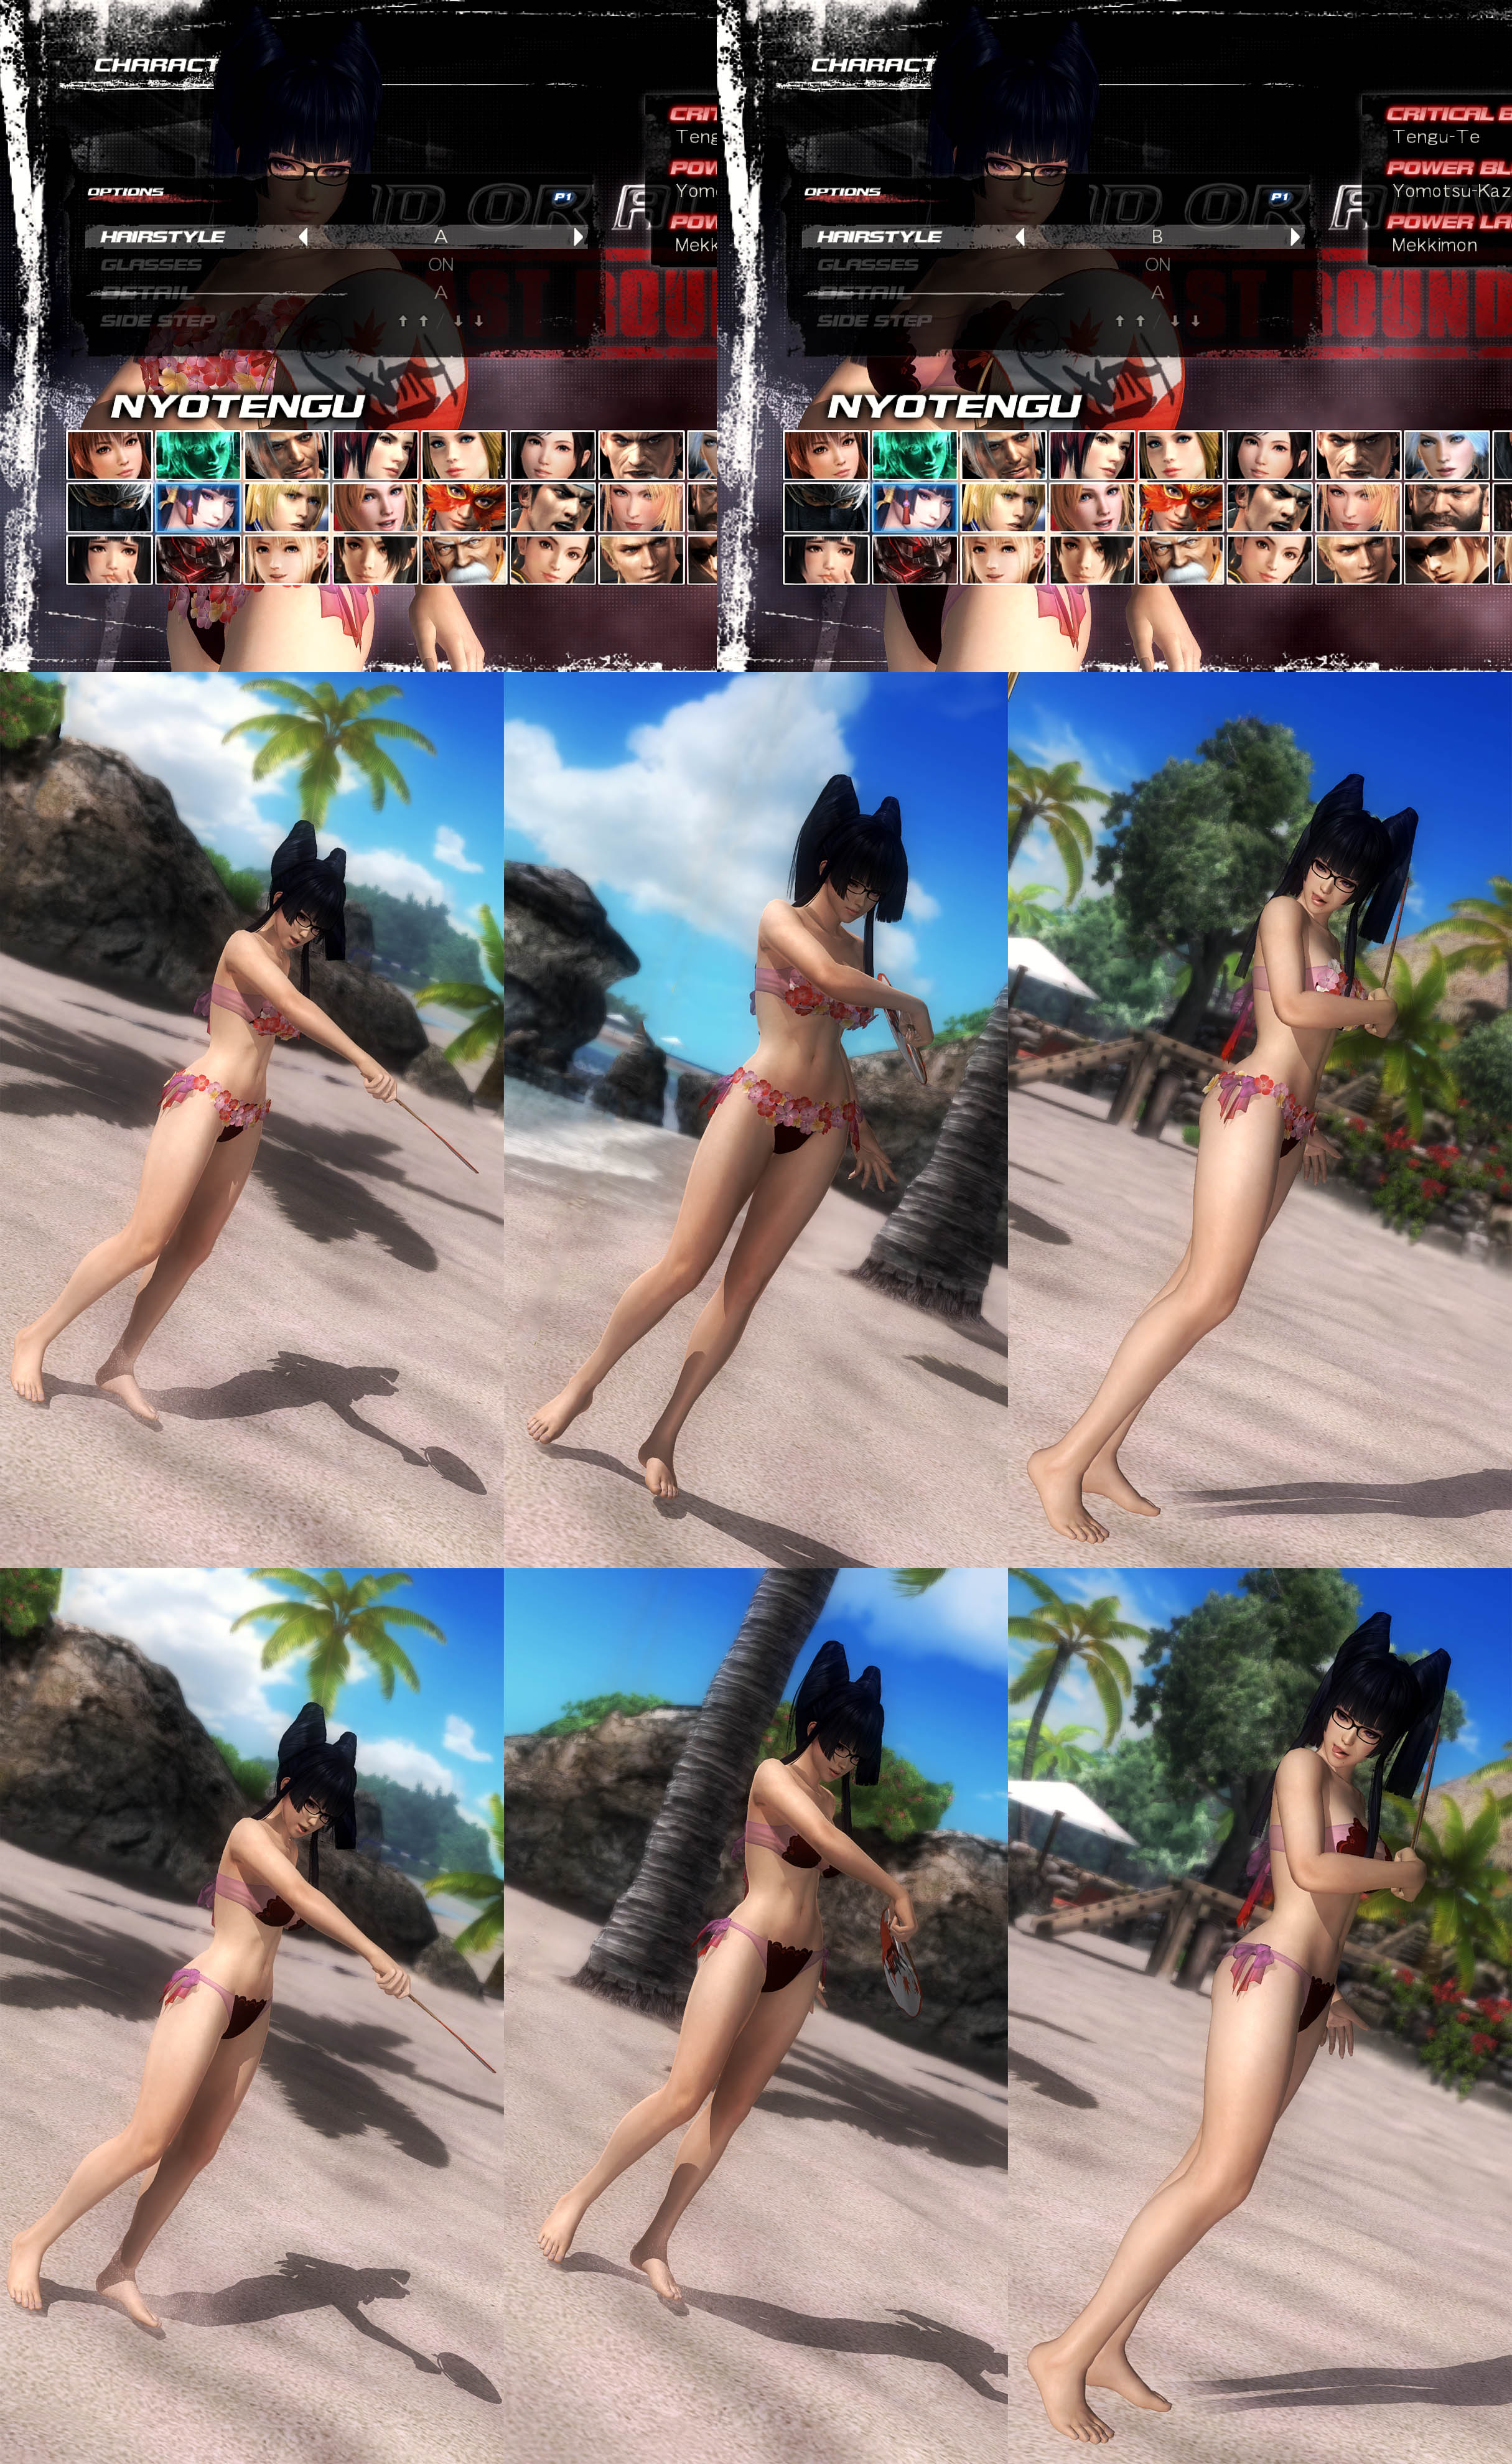 wingless_nyotengu_floral_toggle__fans__bare_feet_by_bbbsfxt-dahw0h0.jpg